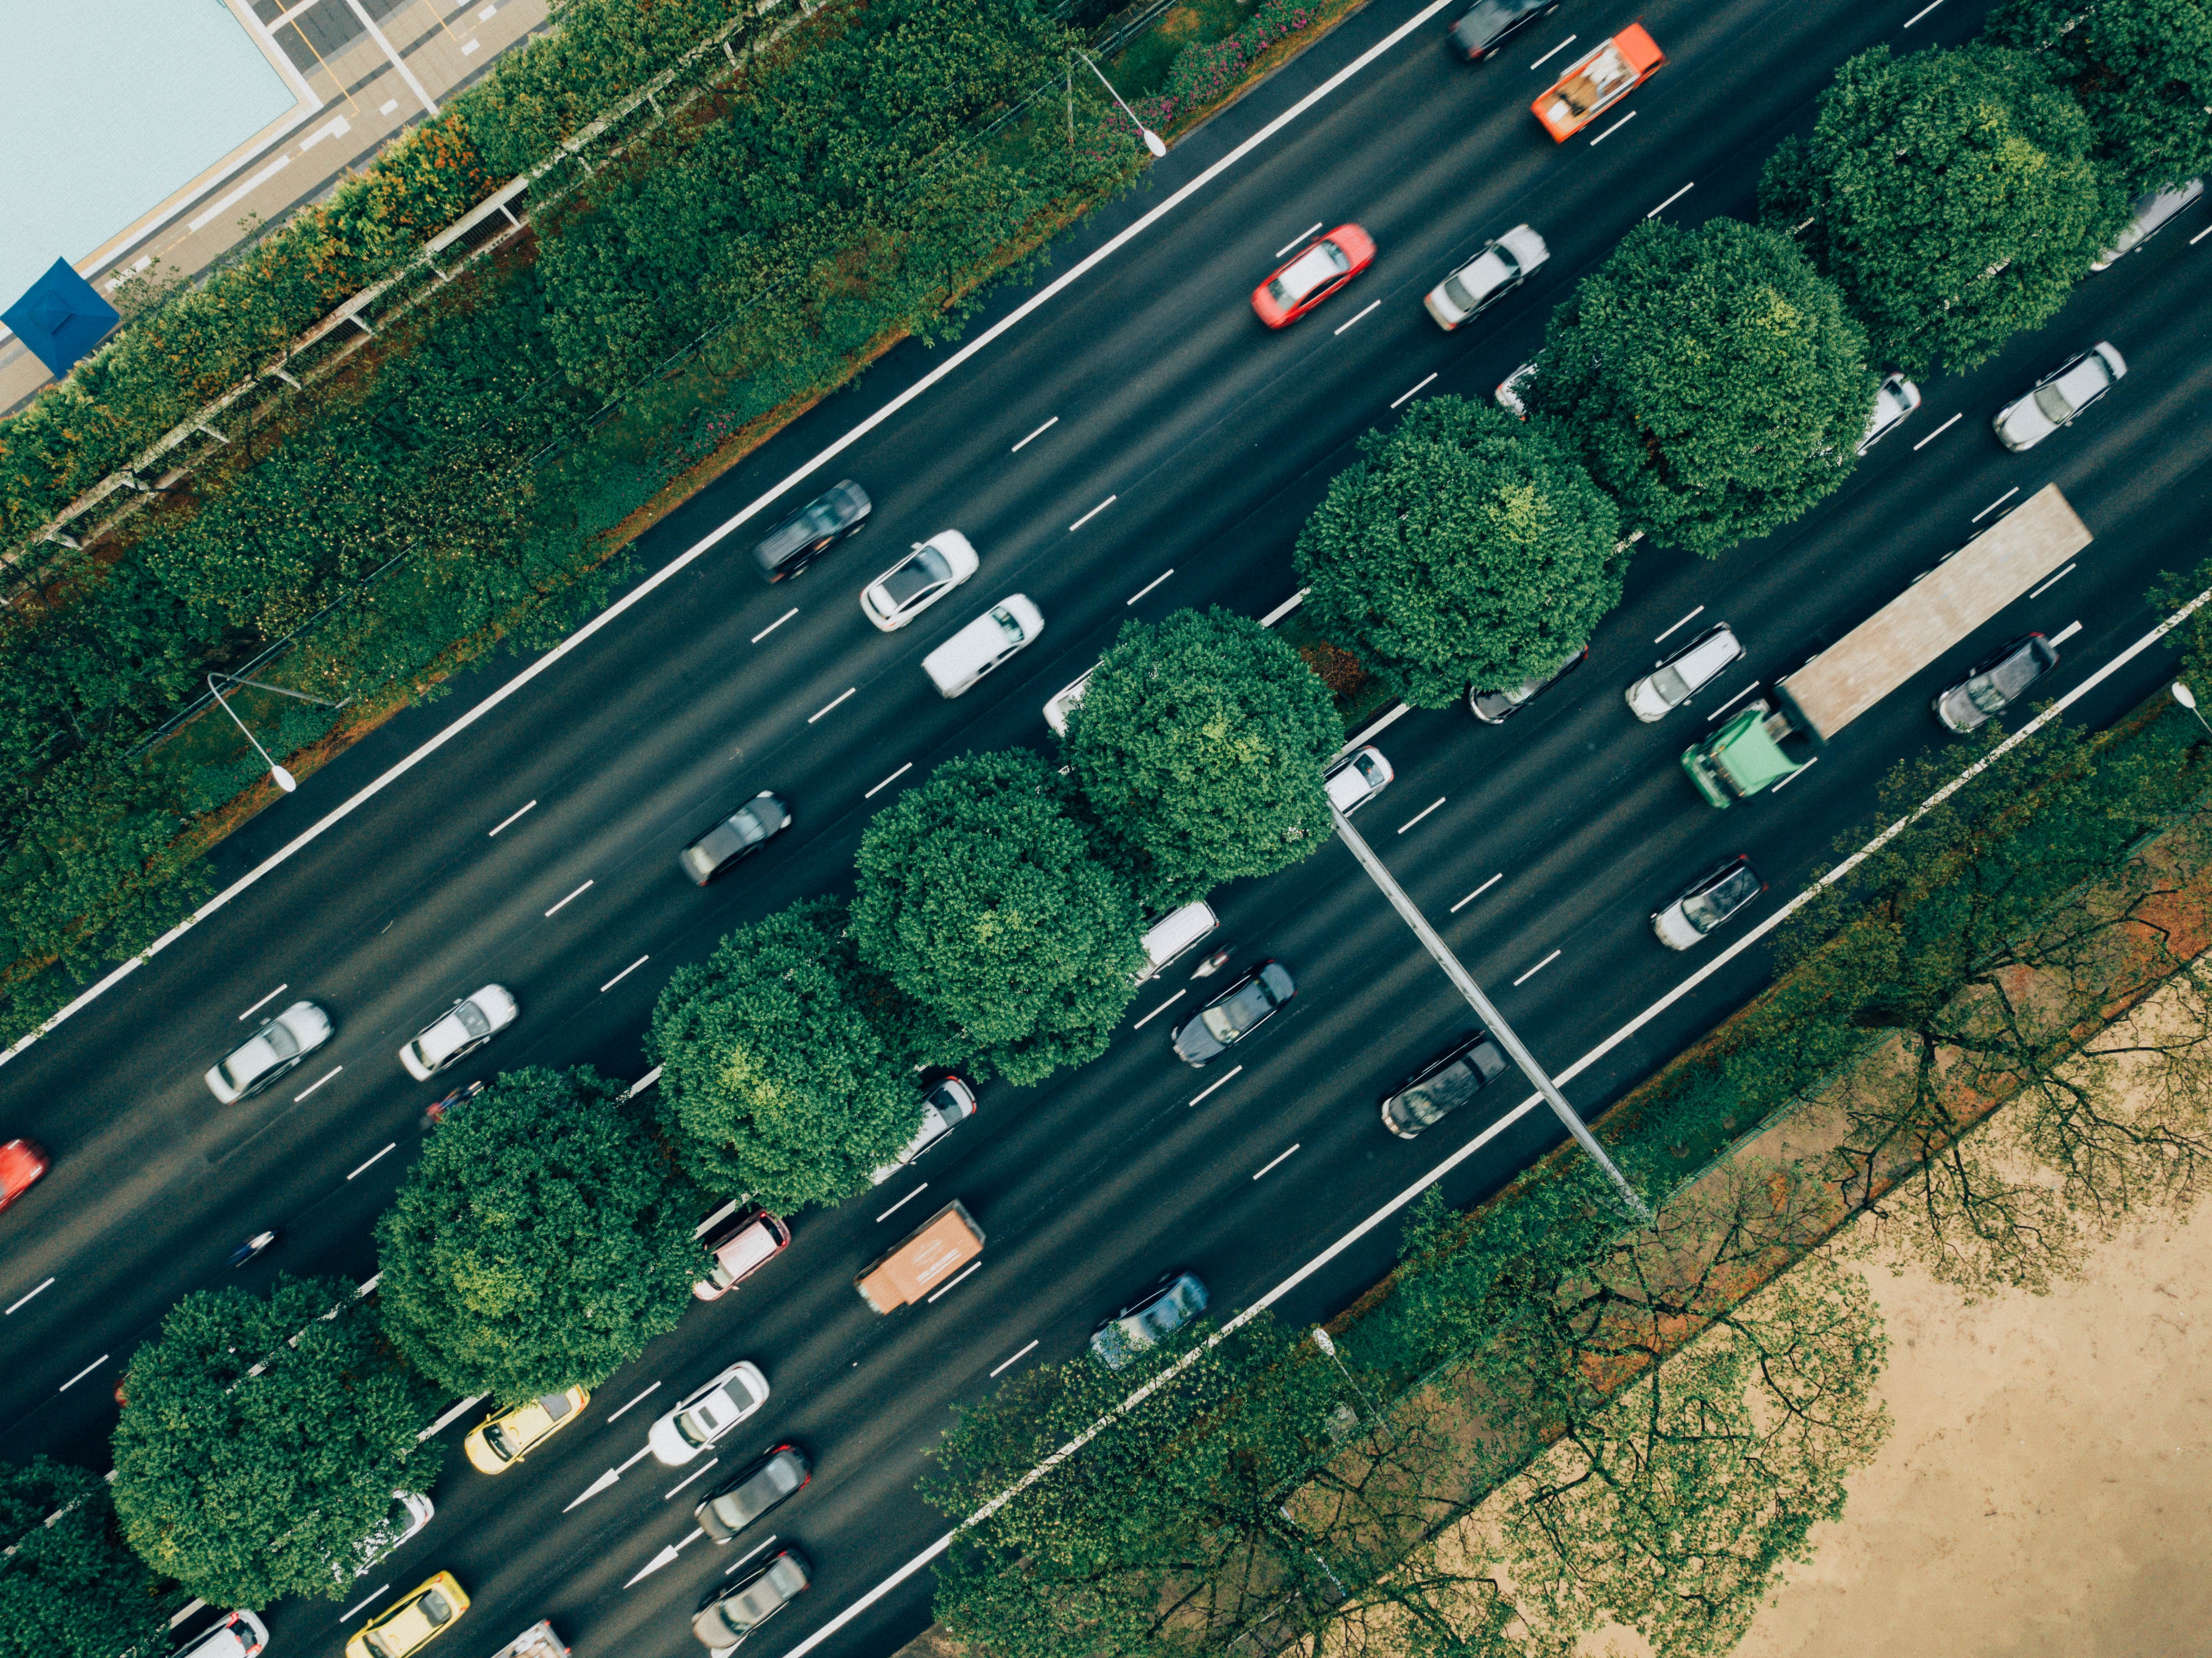 Topview of multi lane highway with trees in the middle